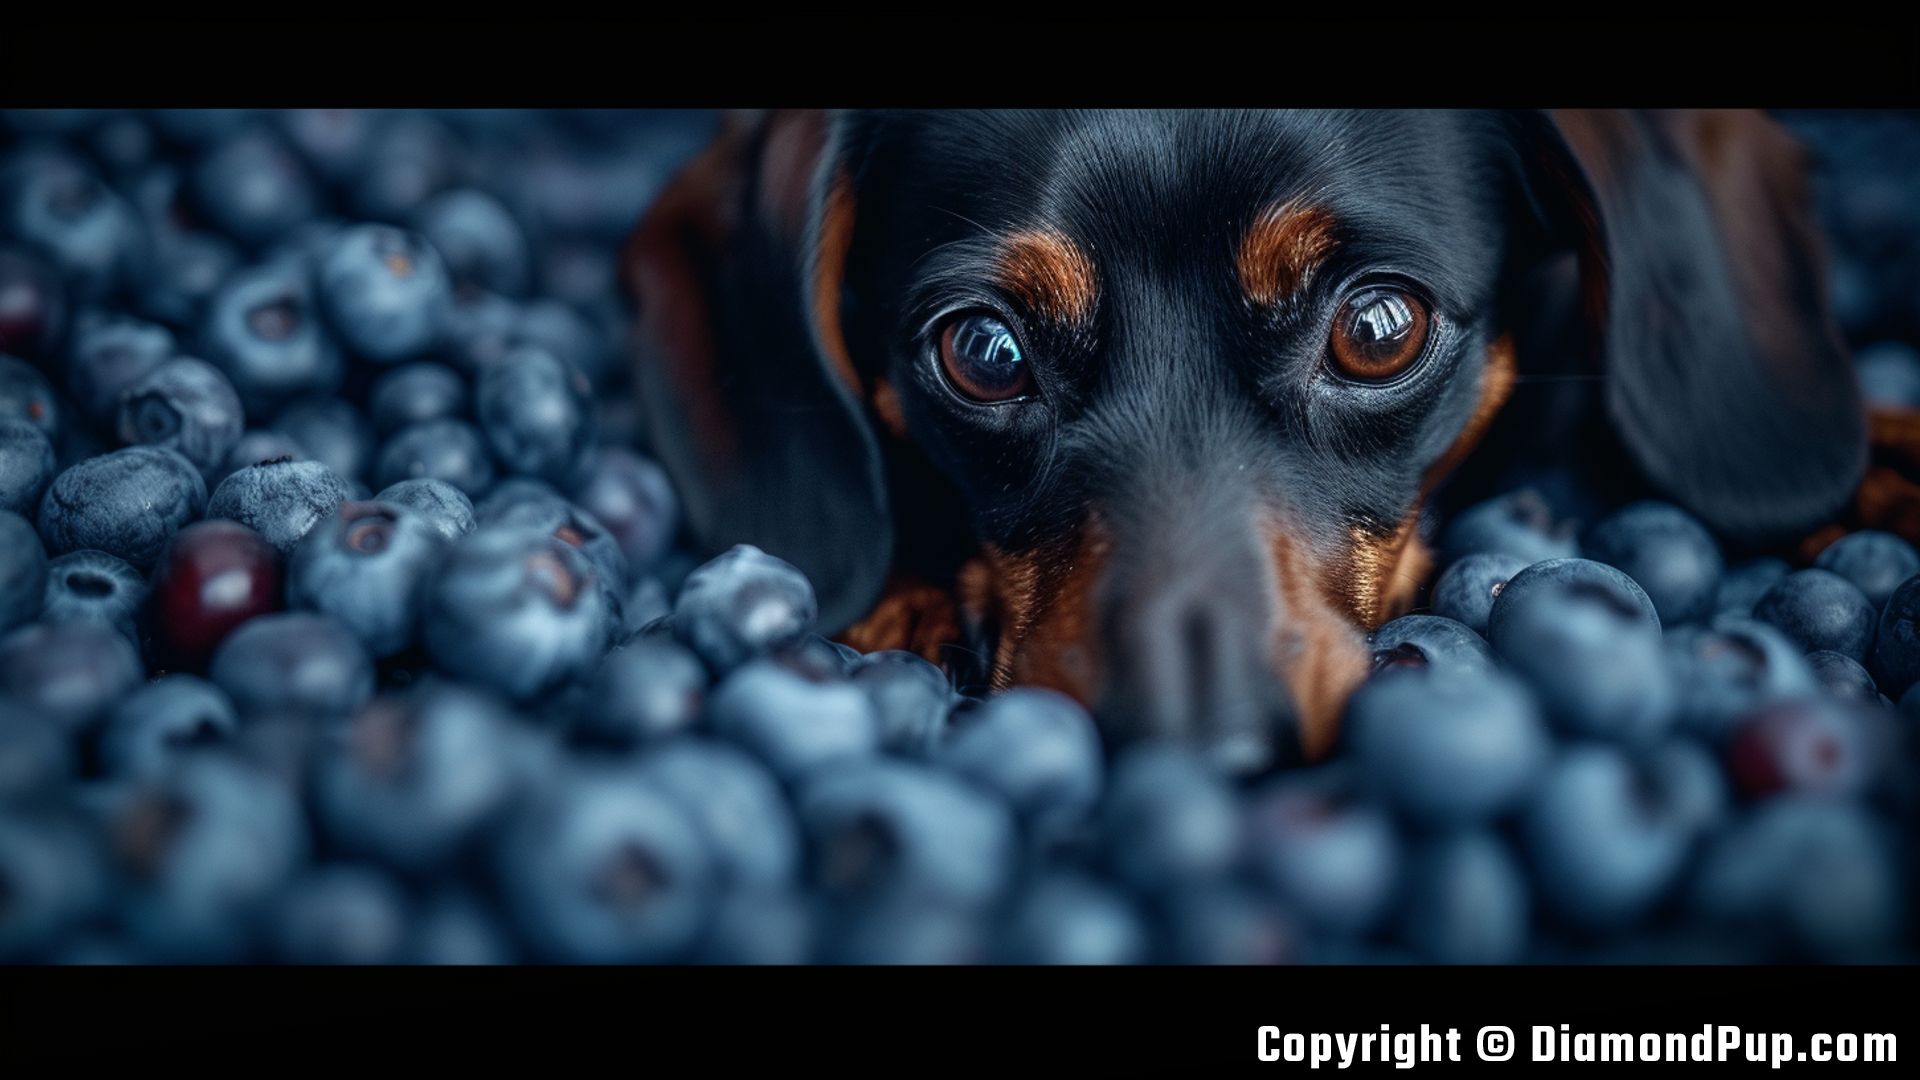 Photograph of Dachshund Snacking on Blueberries